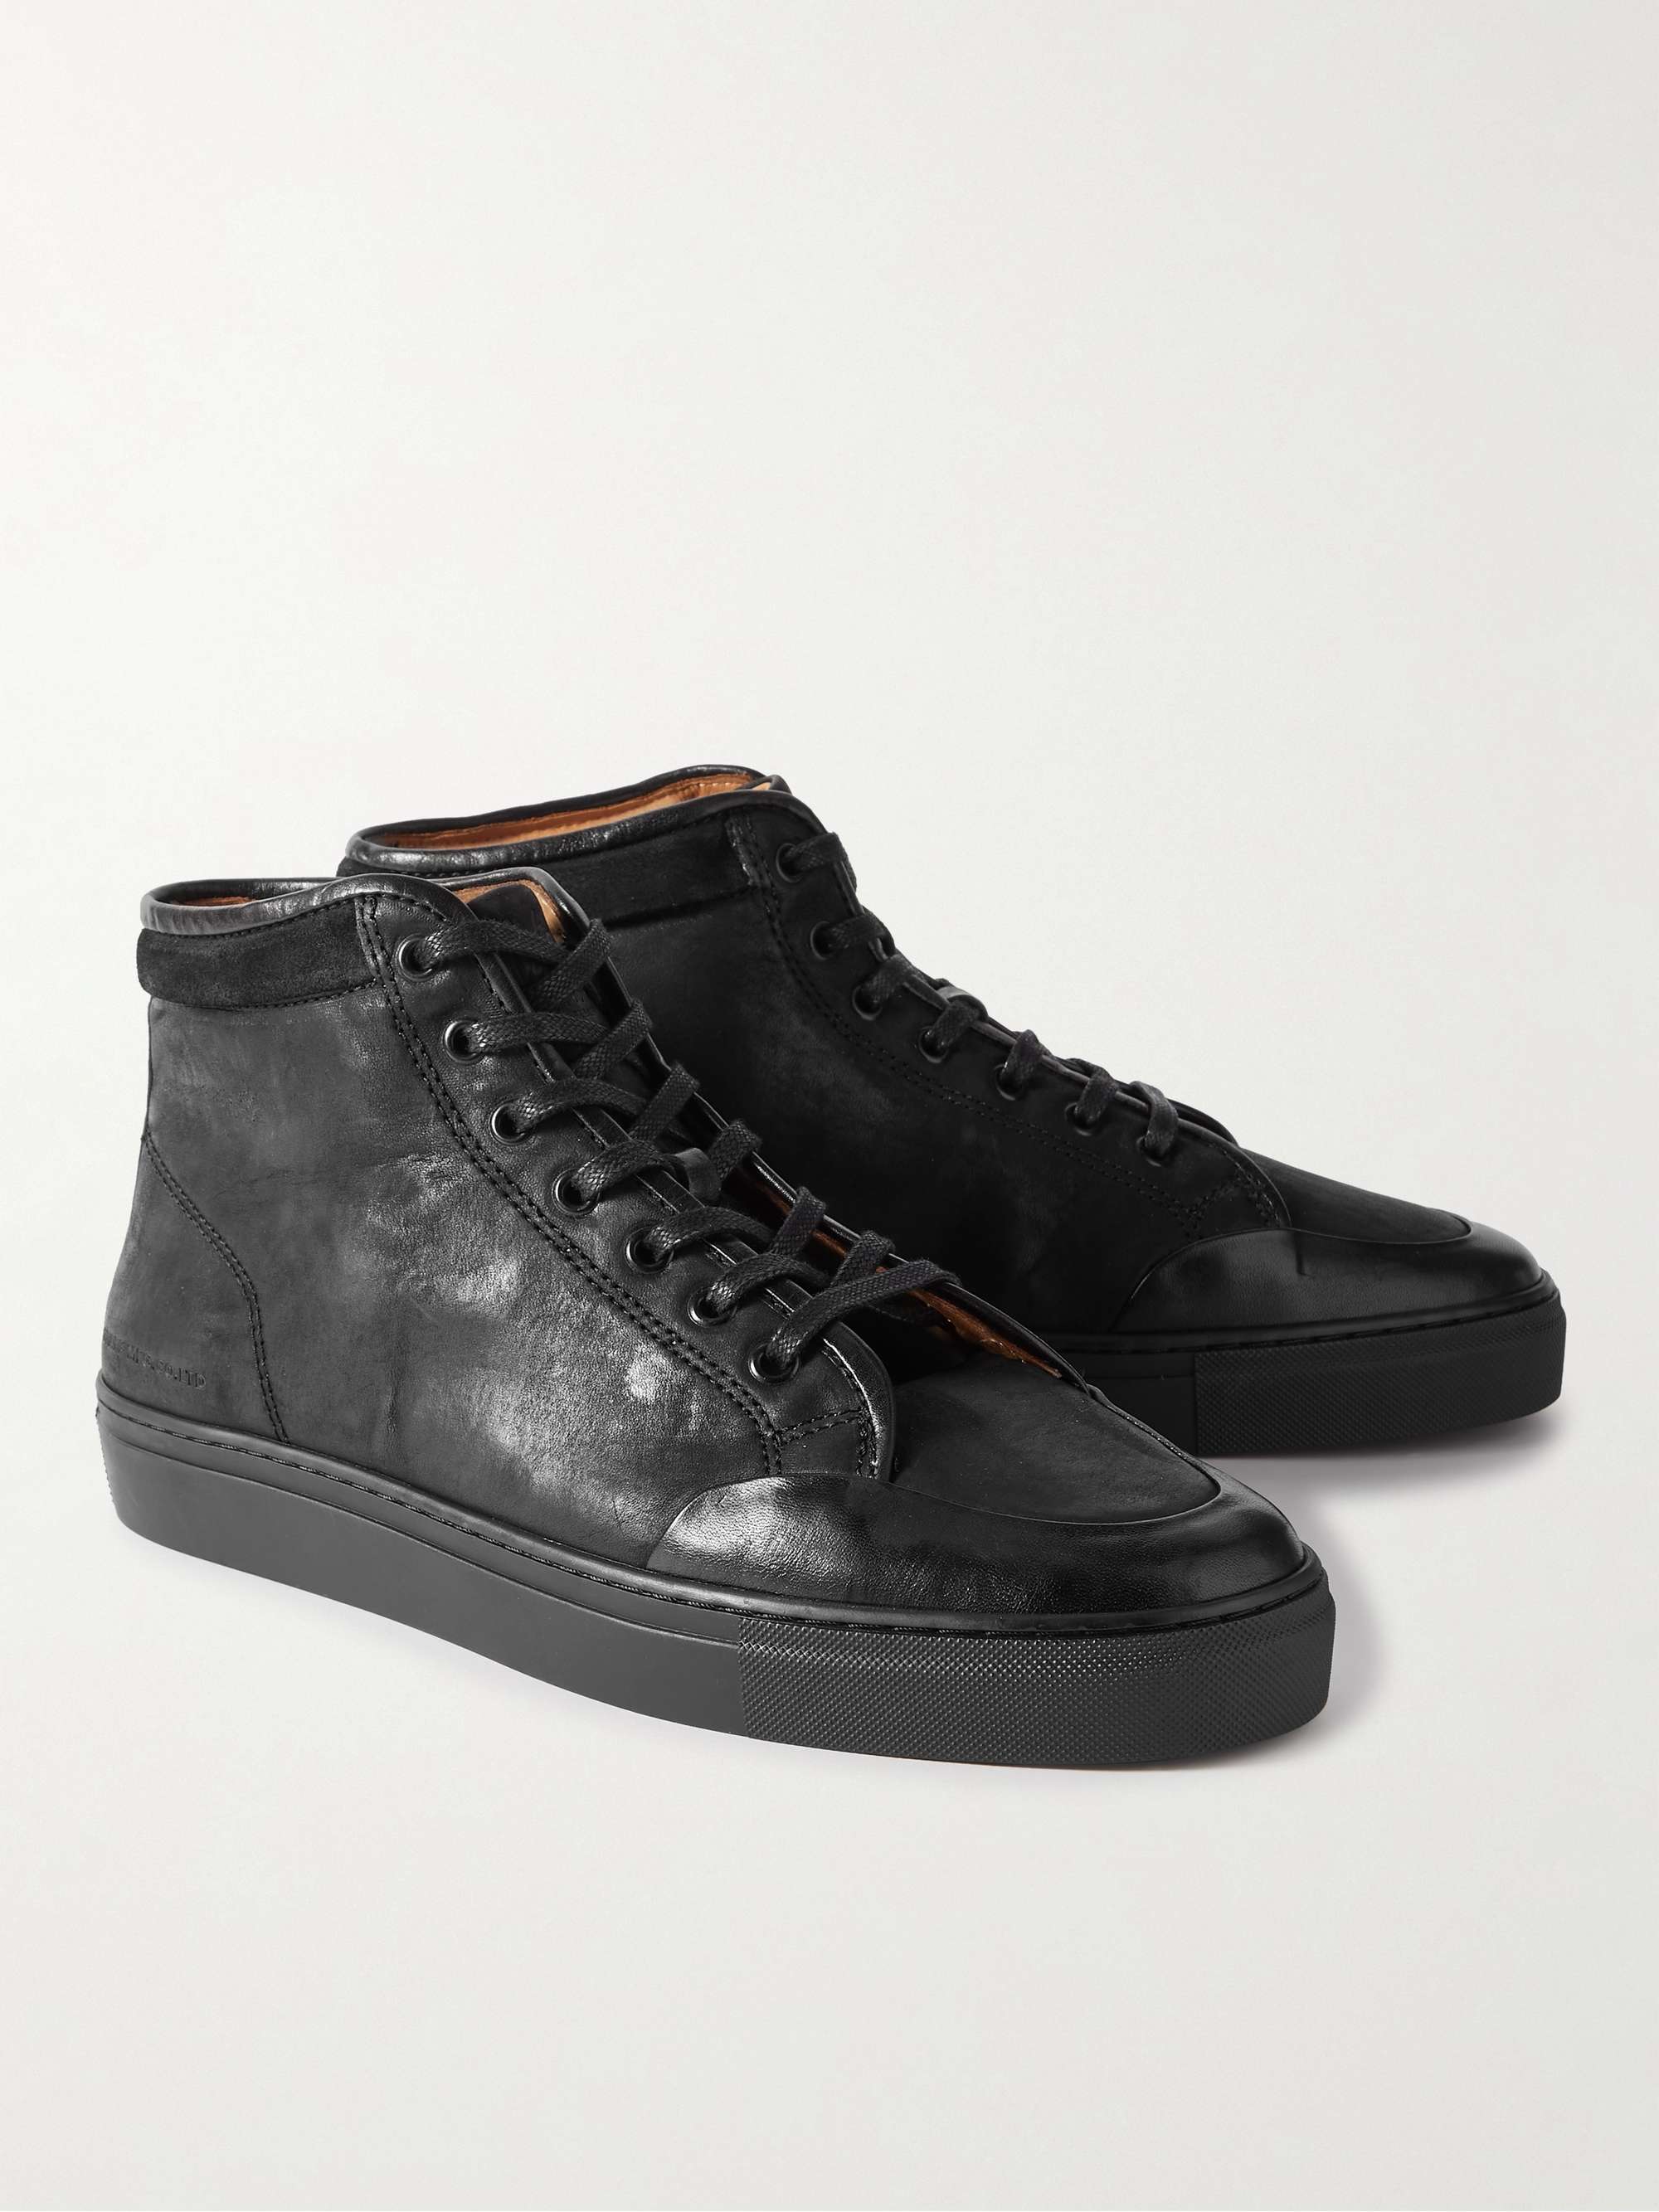 BELSTAFF Rally Suede-Trimmed Leather High-Top Sneakers